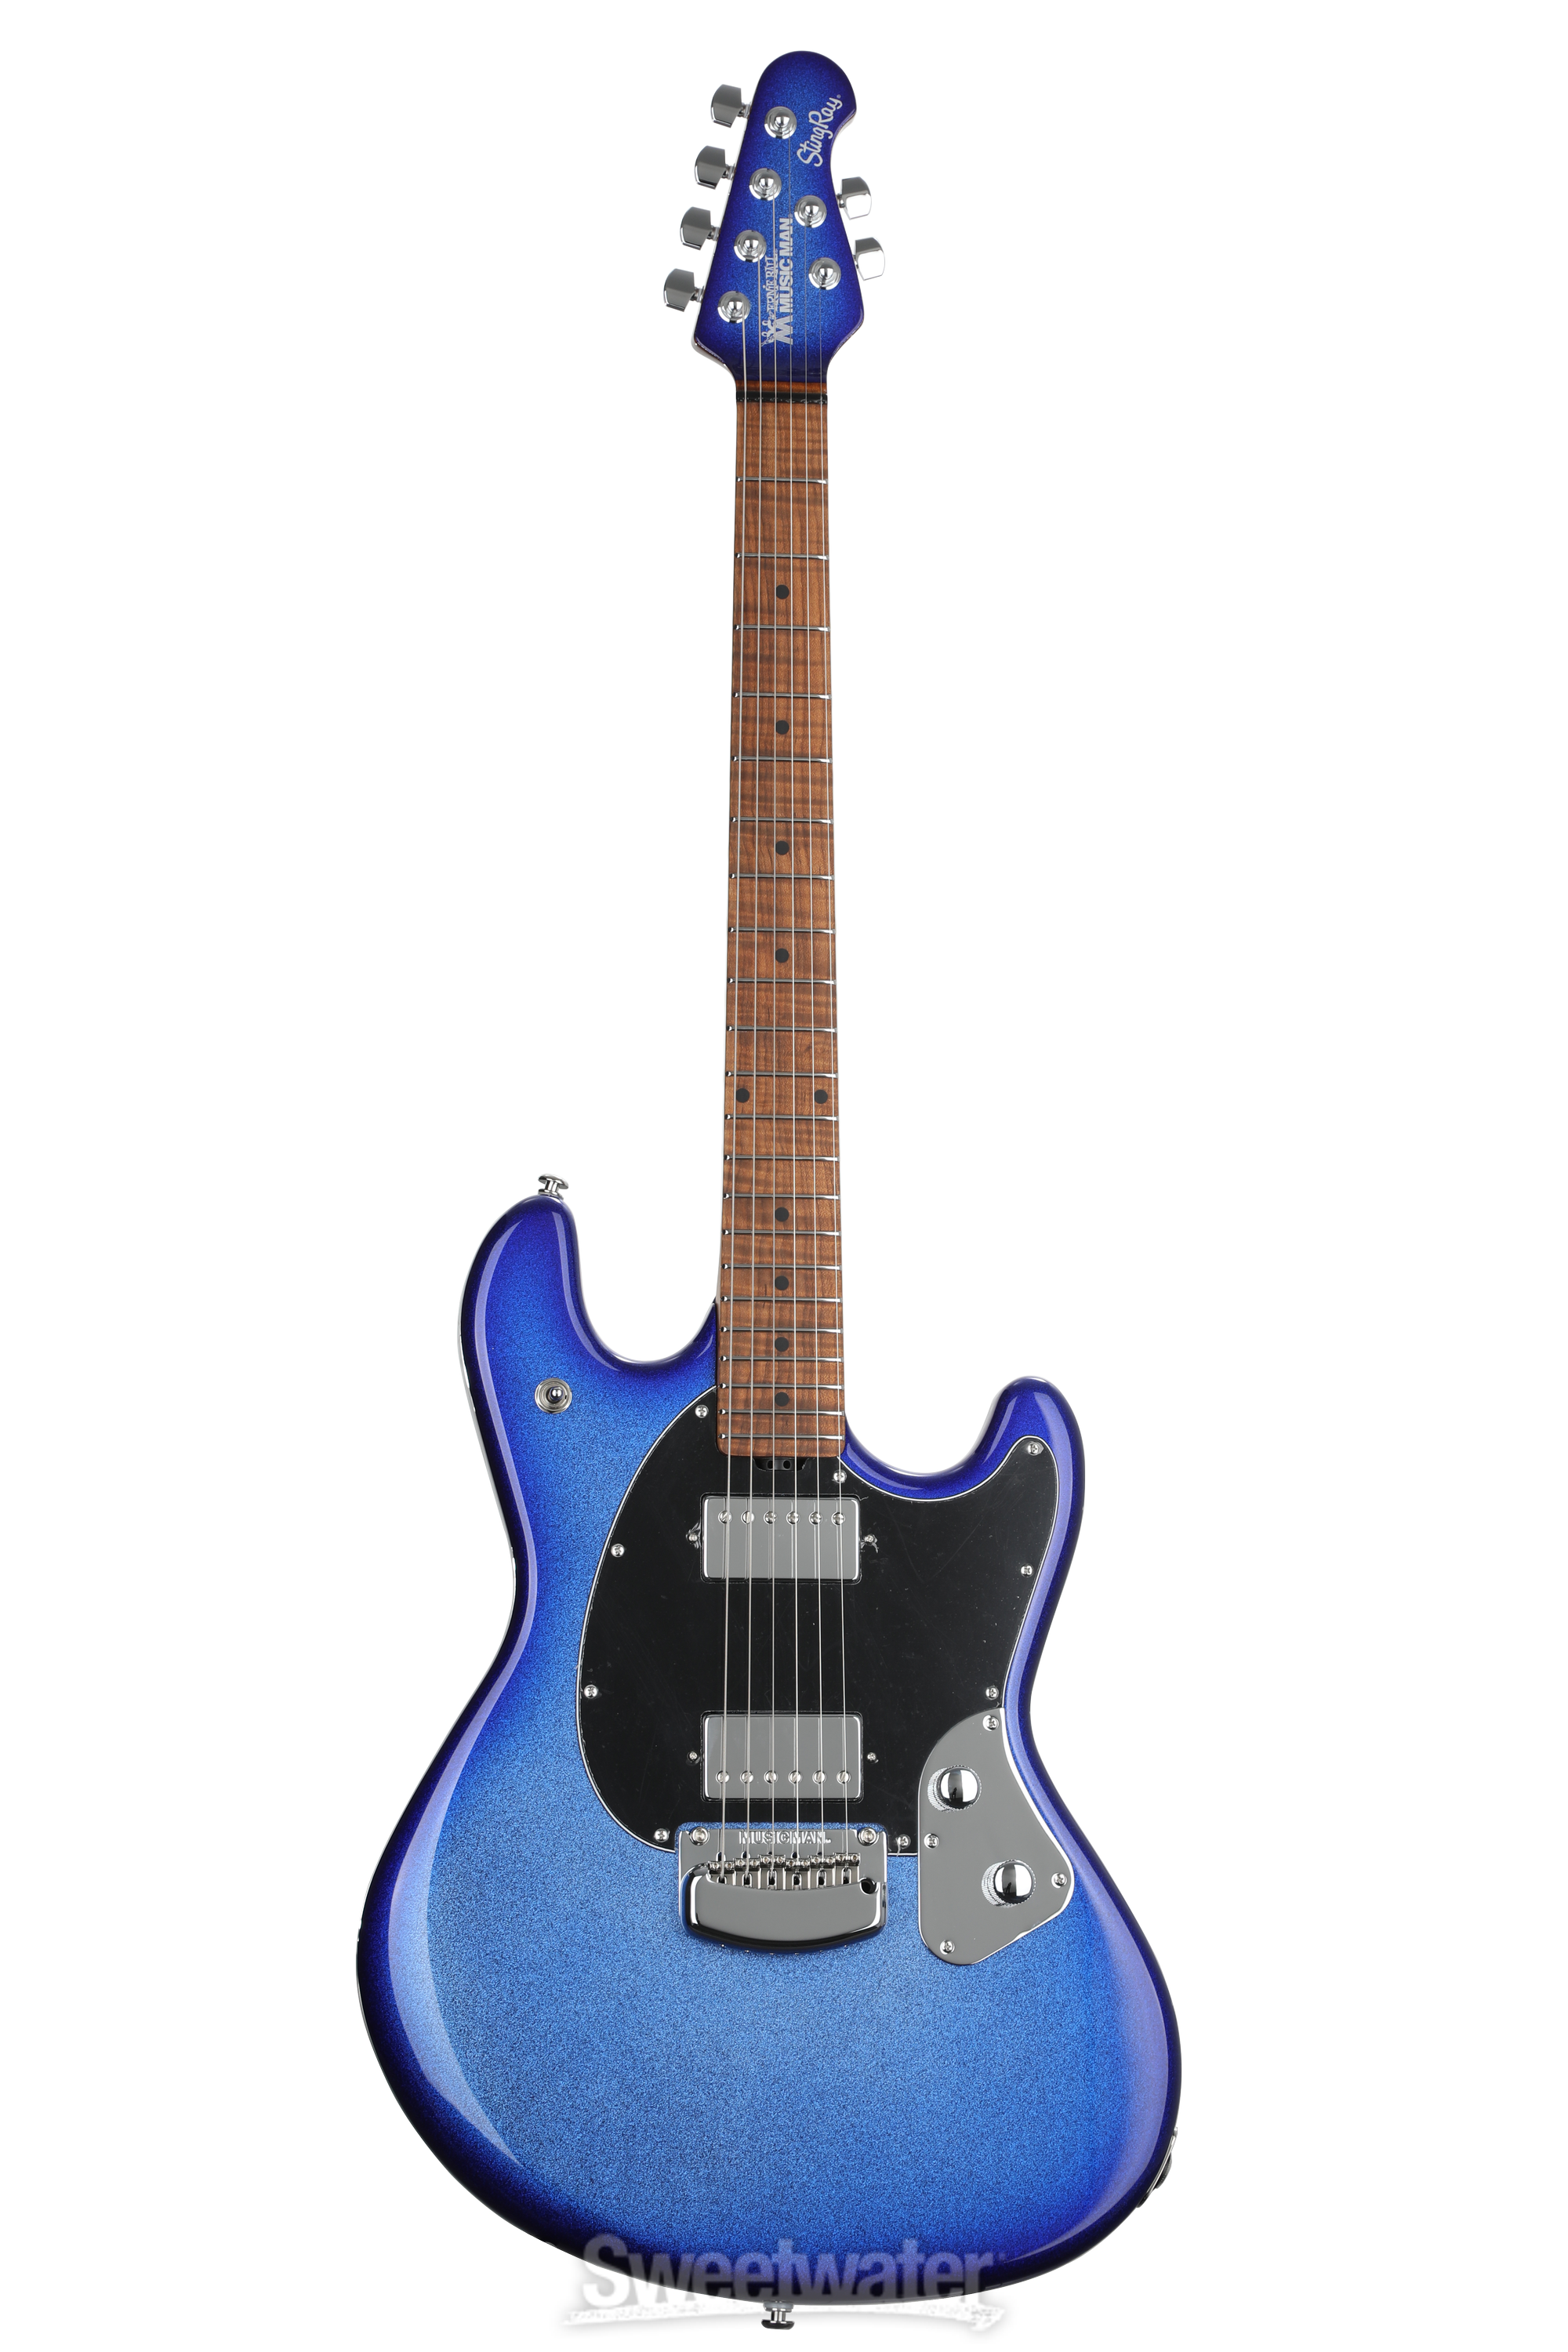 Ernie Ball Music Man StingRay RS Electric Guitar - Pacific Blue Sparkle,  Sweetwater Exclusive